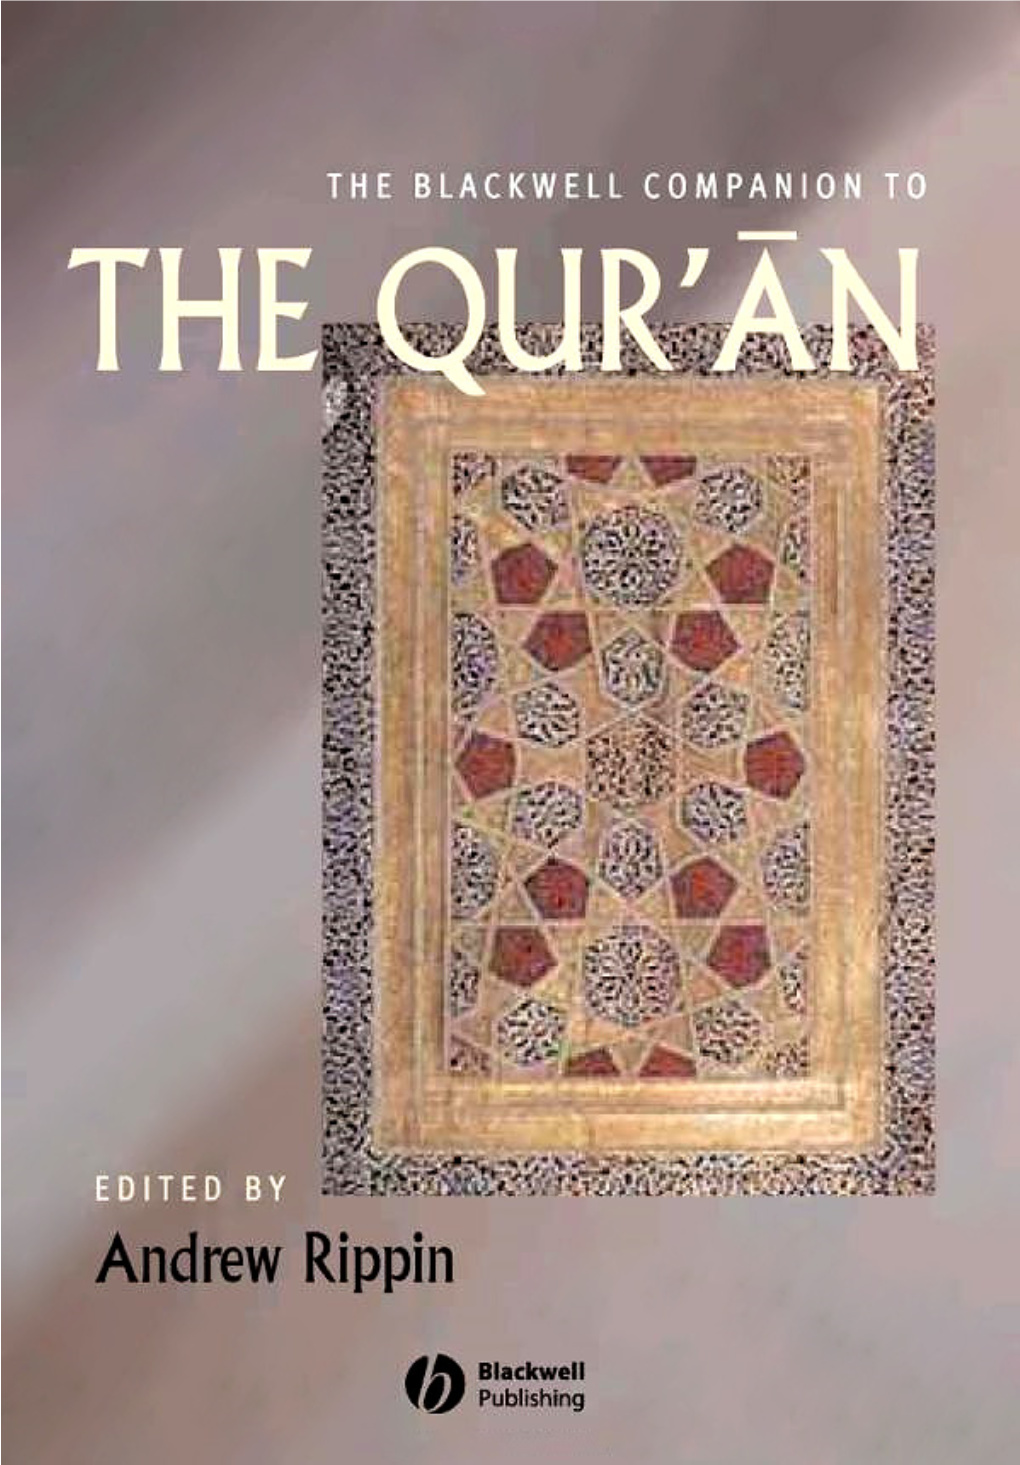 The Blackwell Companion to the Qur&gt;A¯N